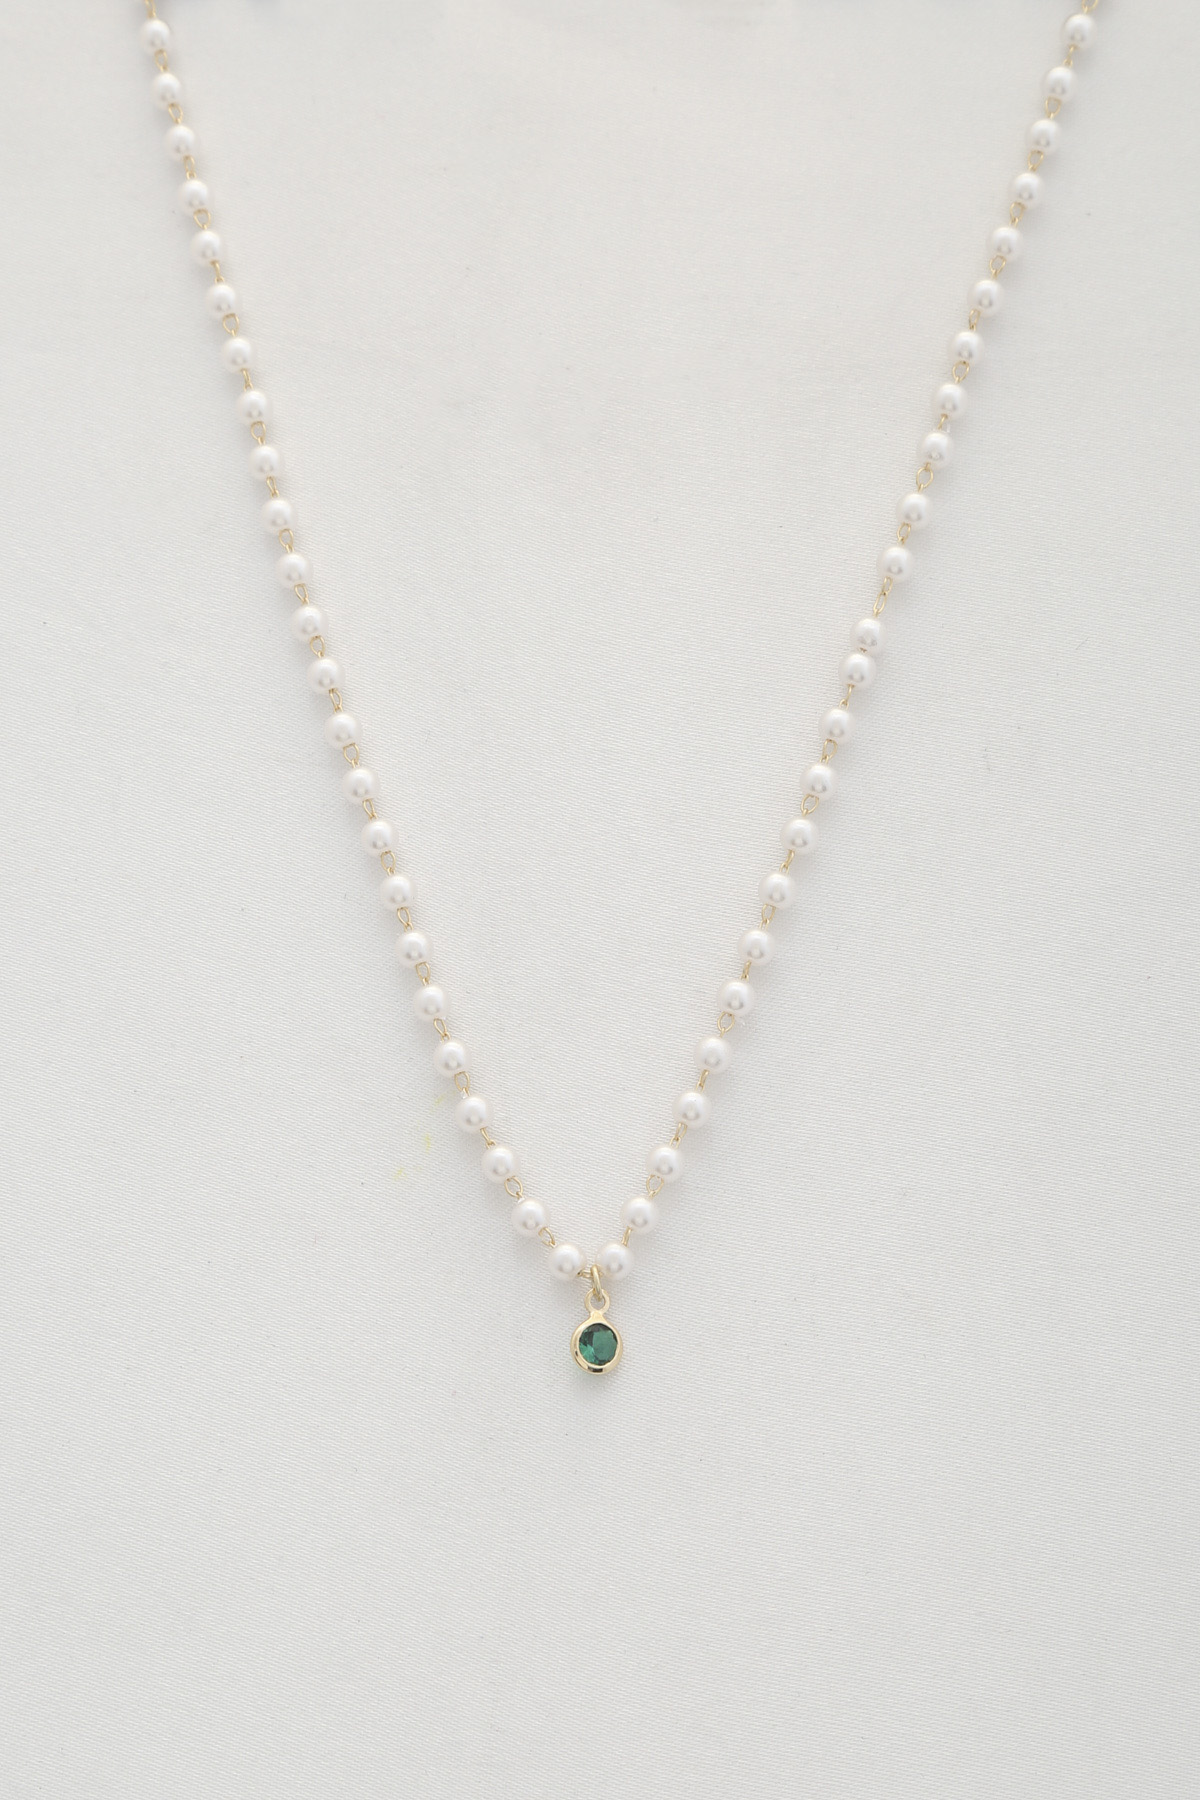 DAINTY CRYSTAL PEARL BEAD NECKLACE